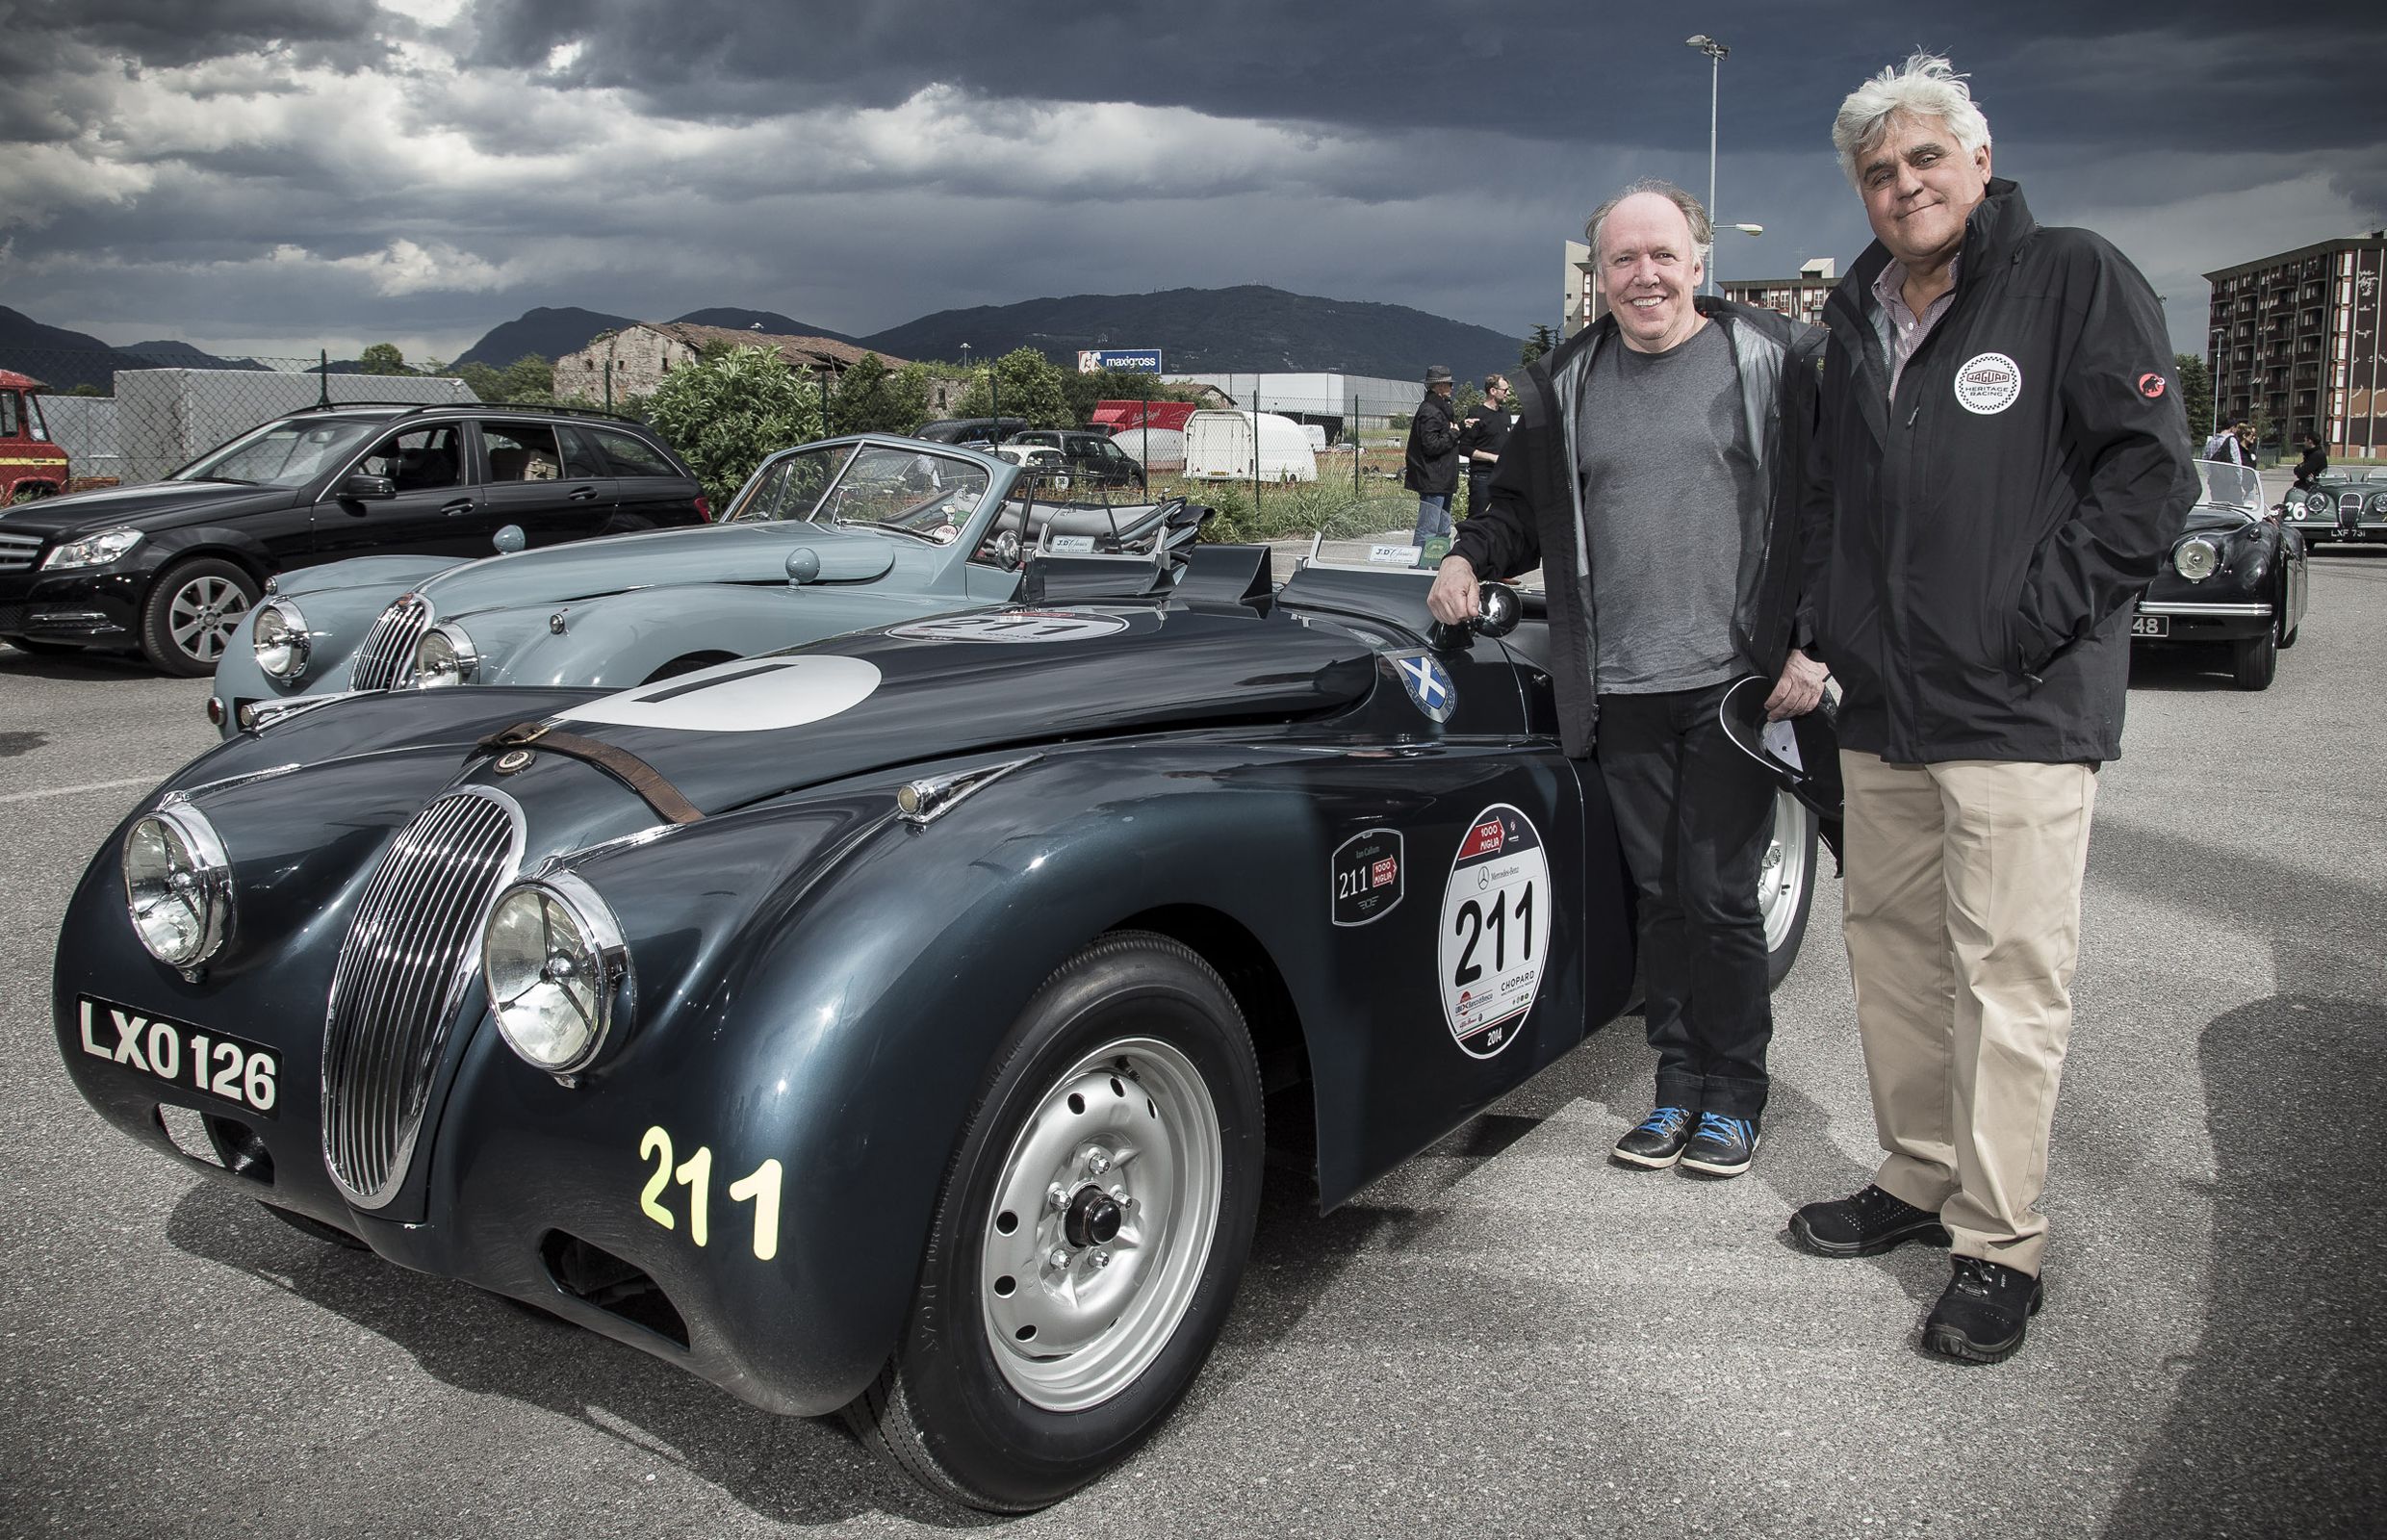 Jay Leno returning to TV with new show about cars | Driving